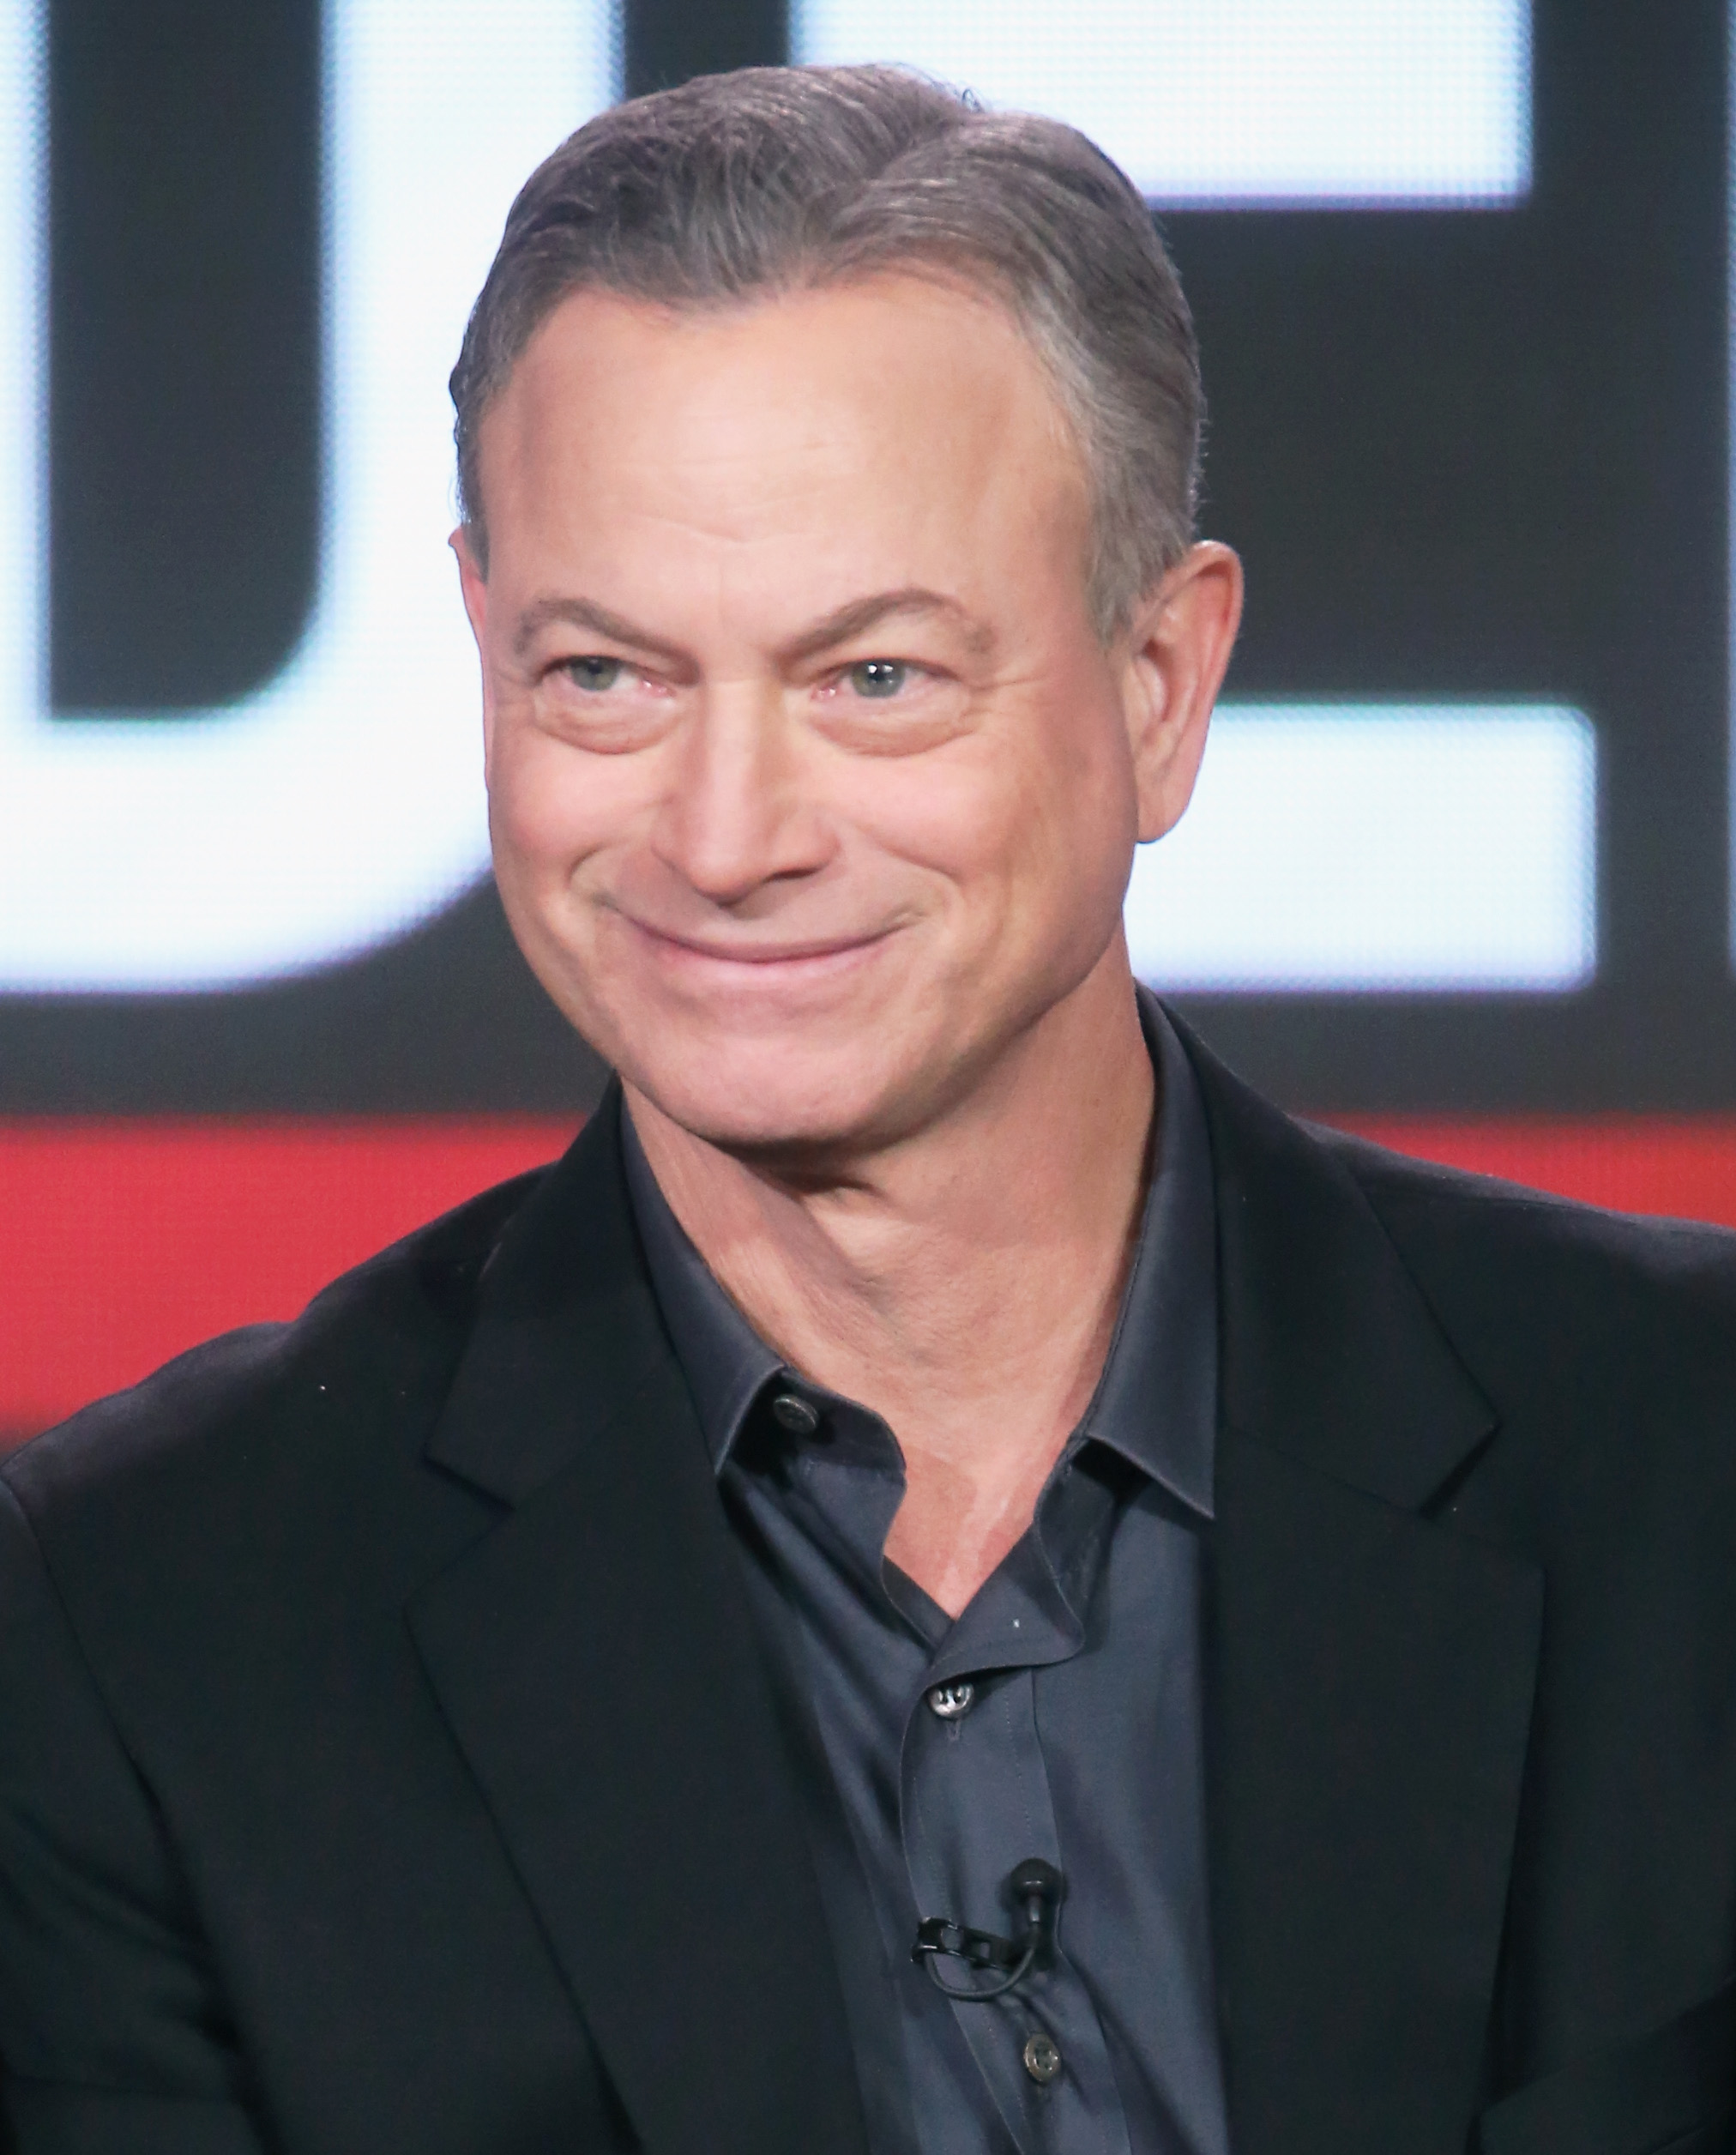 Gary Sinise Receives Humanitarian Award and ‘Proud Salute’ for Serving